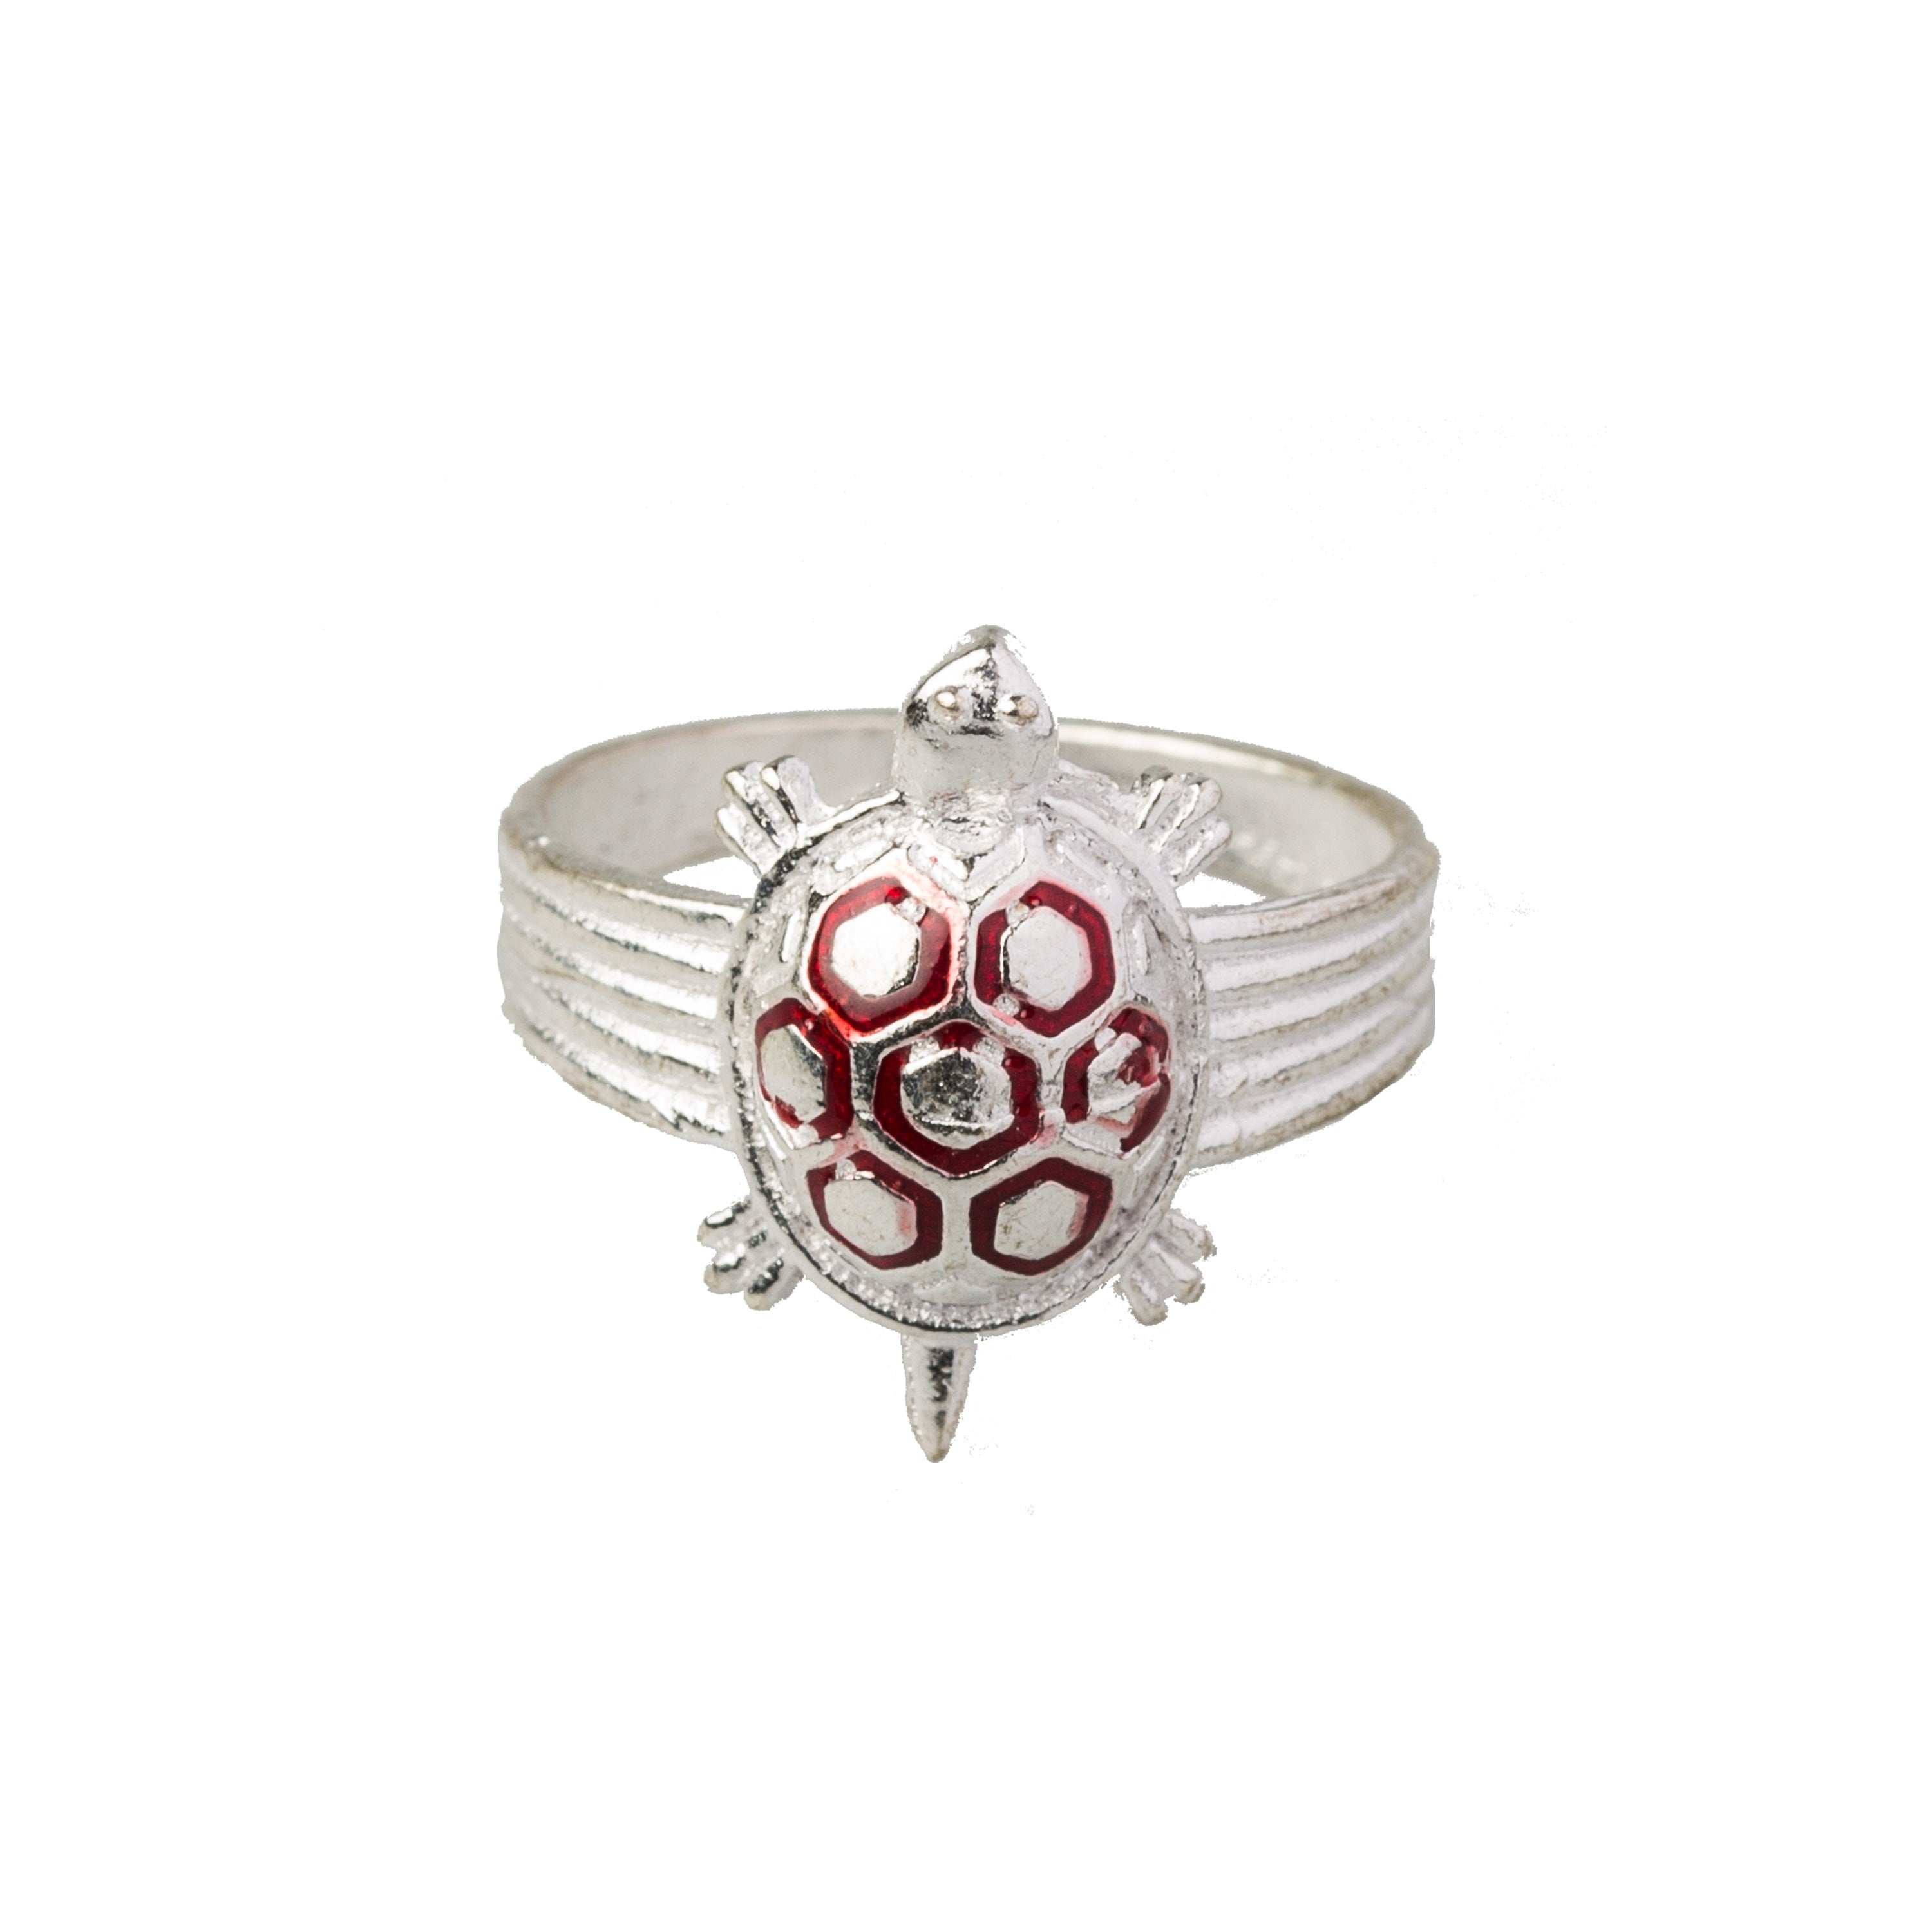 Silver Tortoise Ring Benefits: Symbol of Good Luck